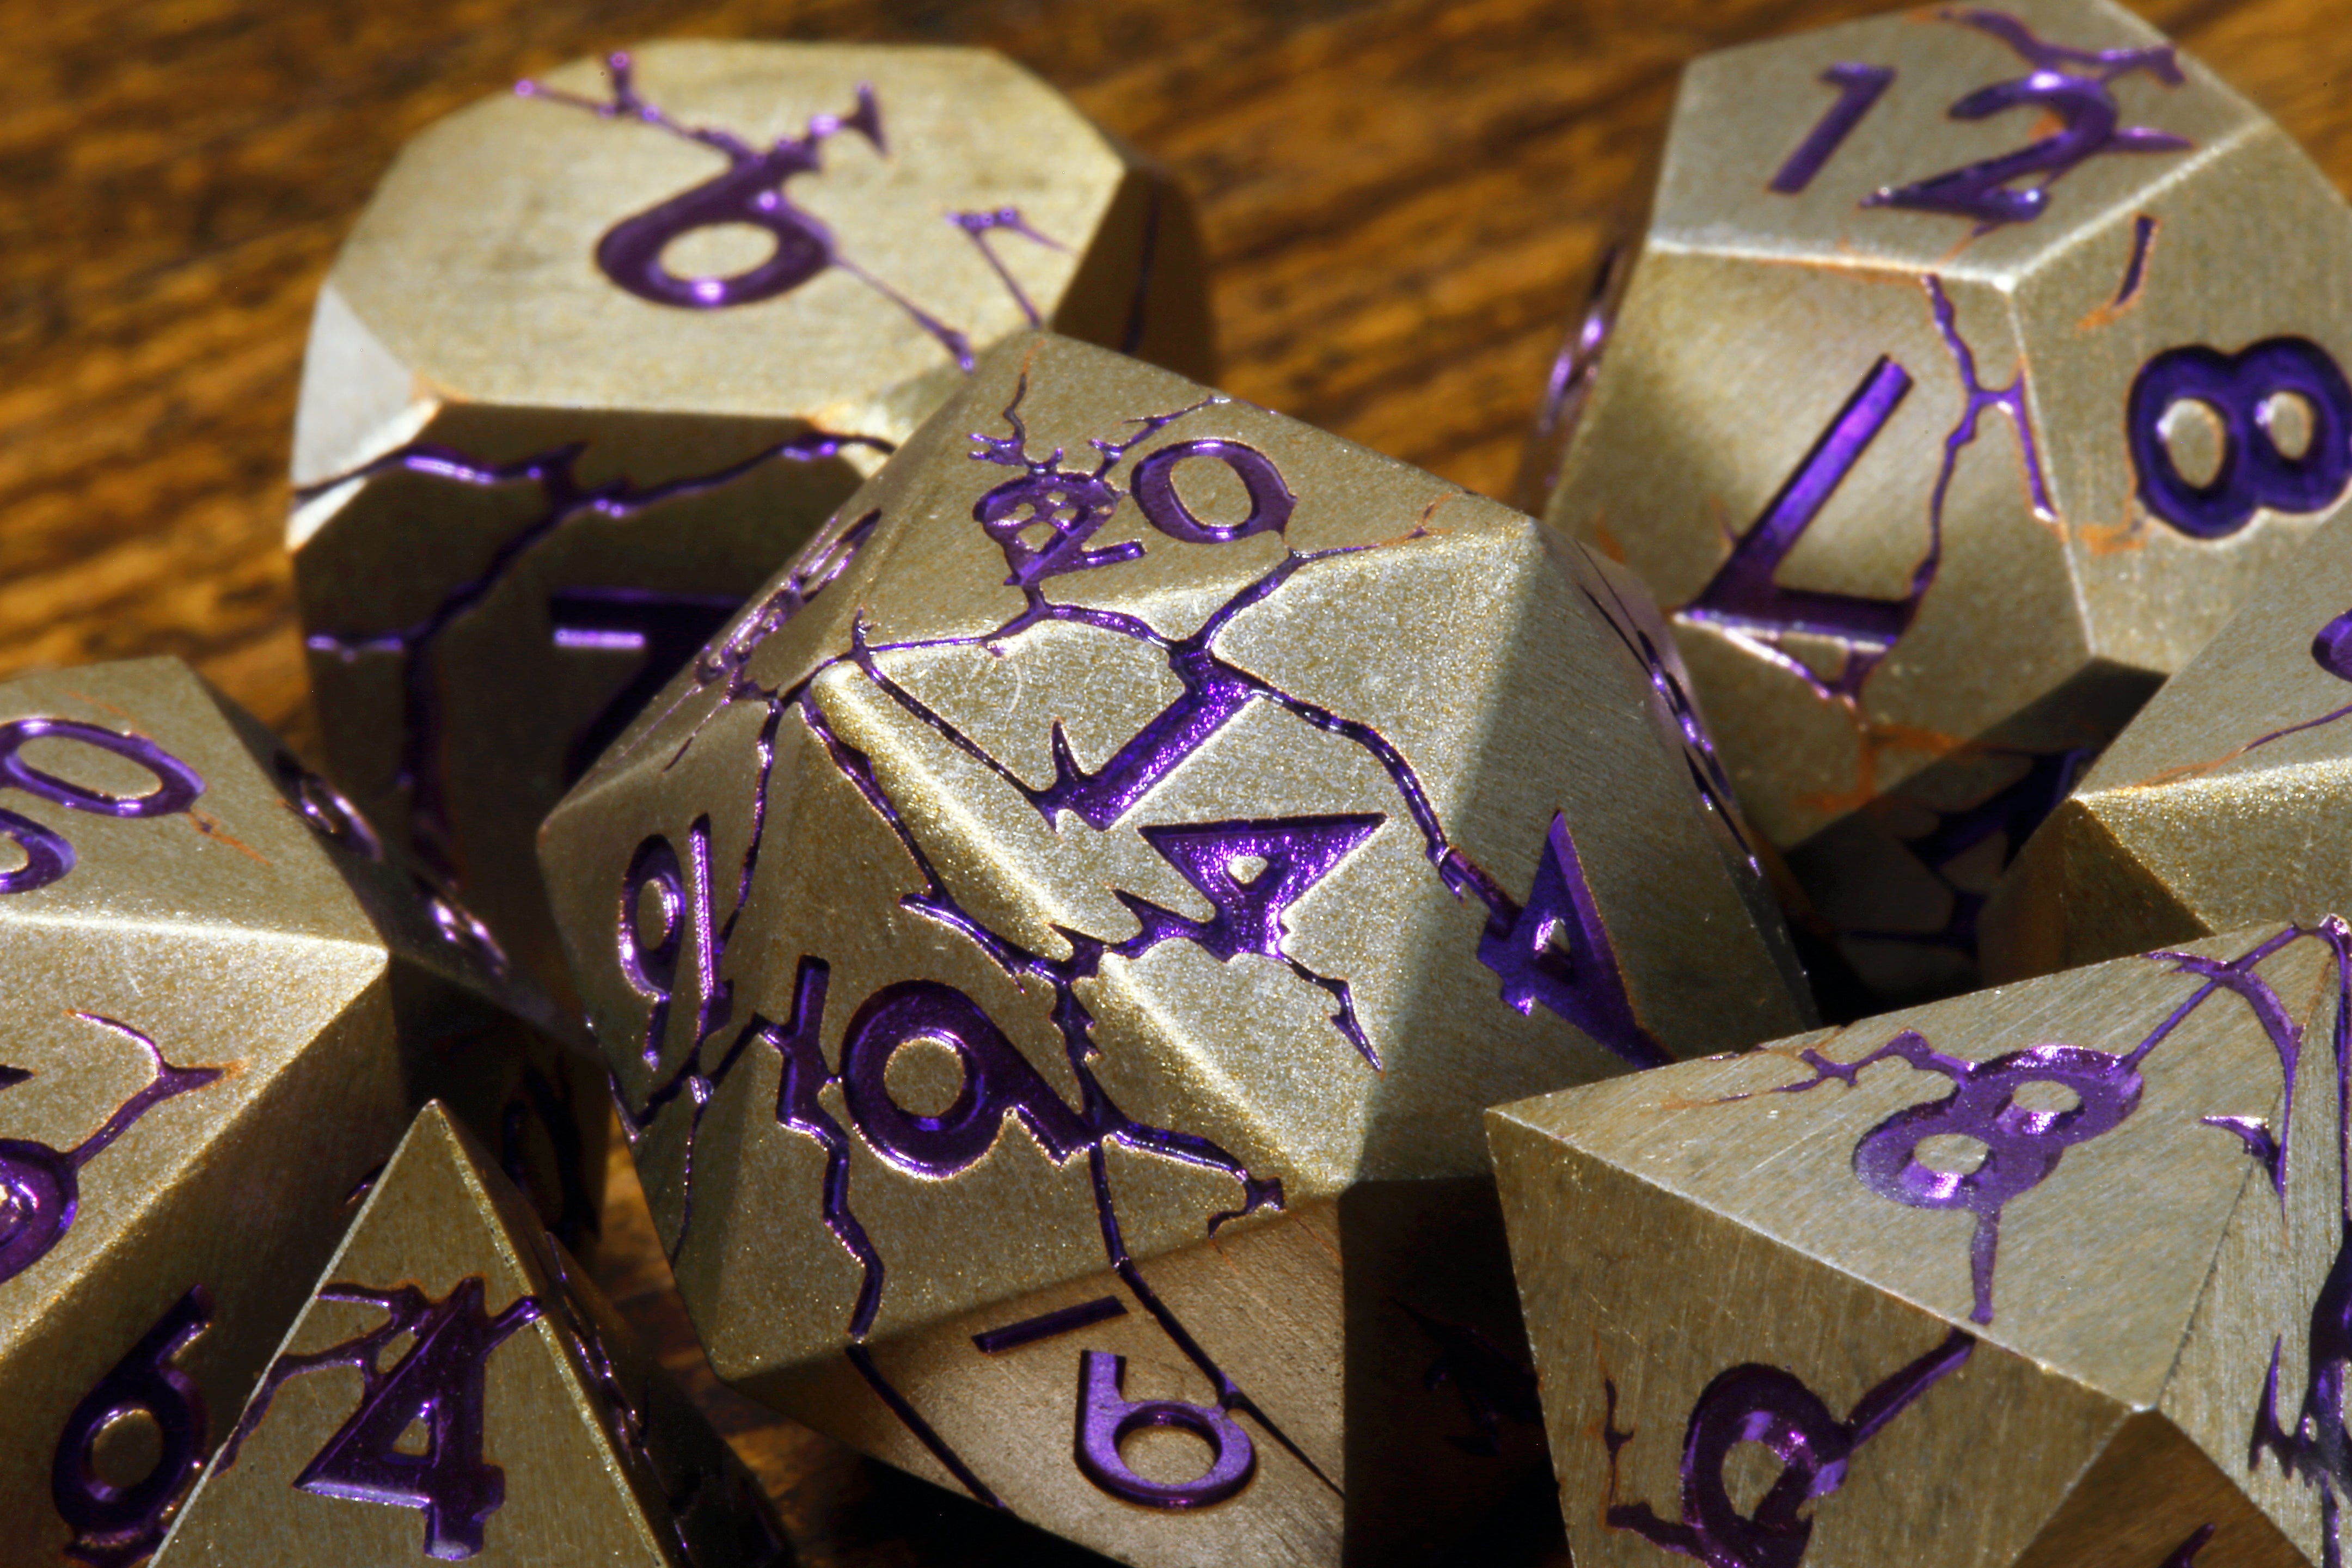 Eldritch Lair - Antique gold with cracked stone effect and purple font - The Wizard's Vault